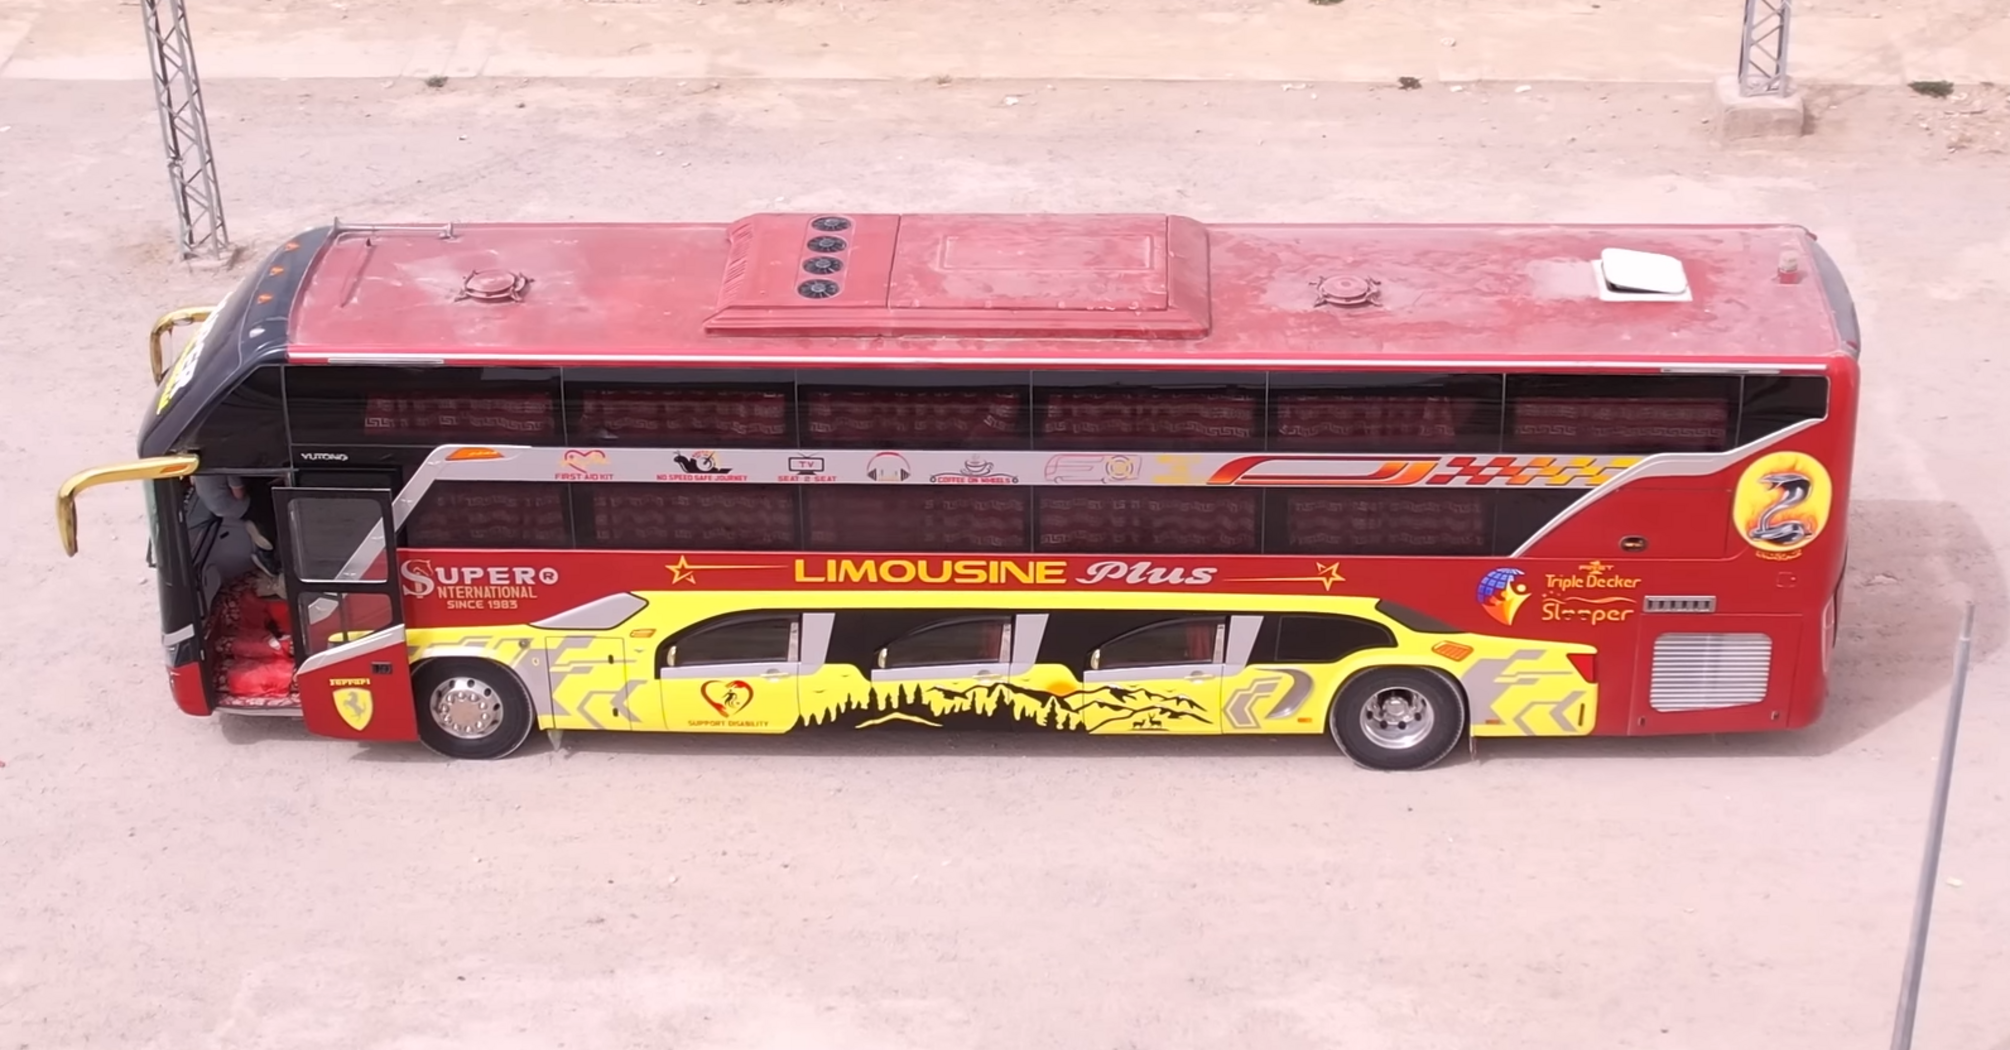 "The strangest bus": Pakistan's iconic bus with many doors and a limousine